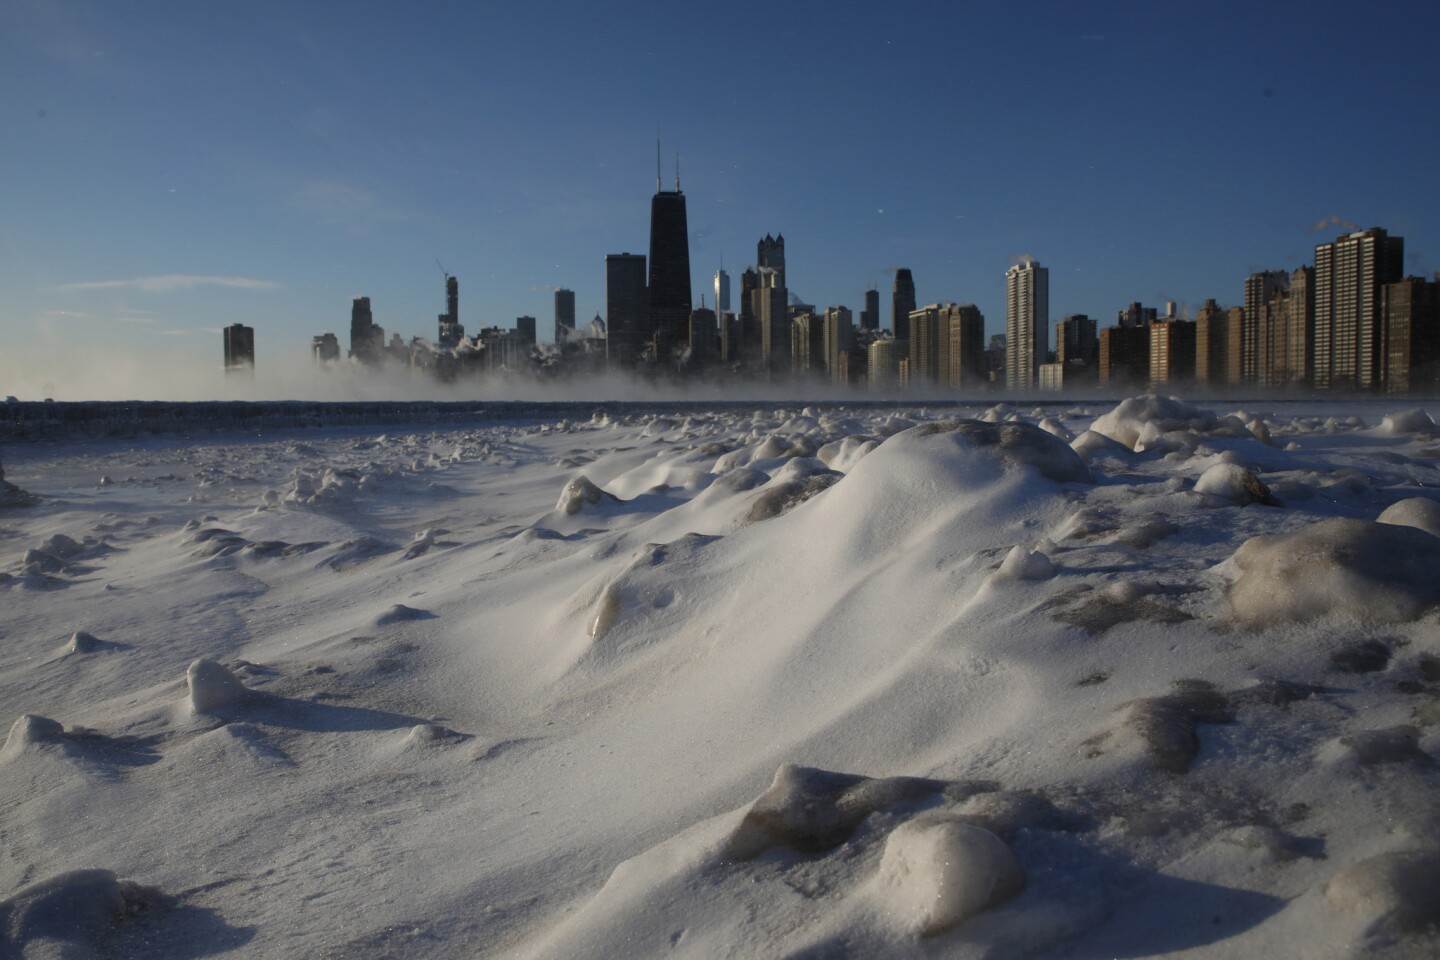 The sunrise reveals a frigid Chicago lakefront with temperatures around minus 20 degrees early Jan. 30, 2019.